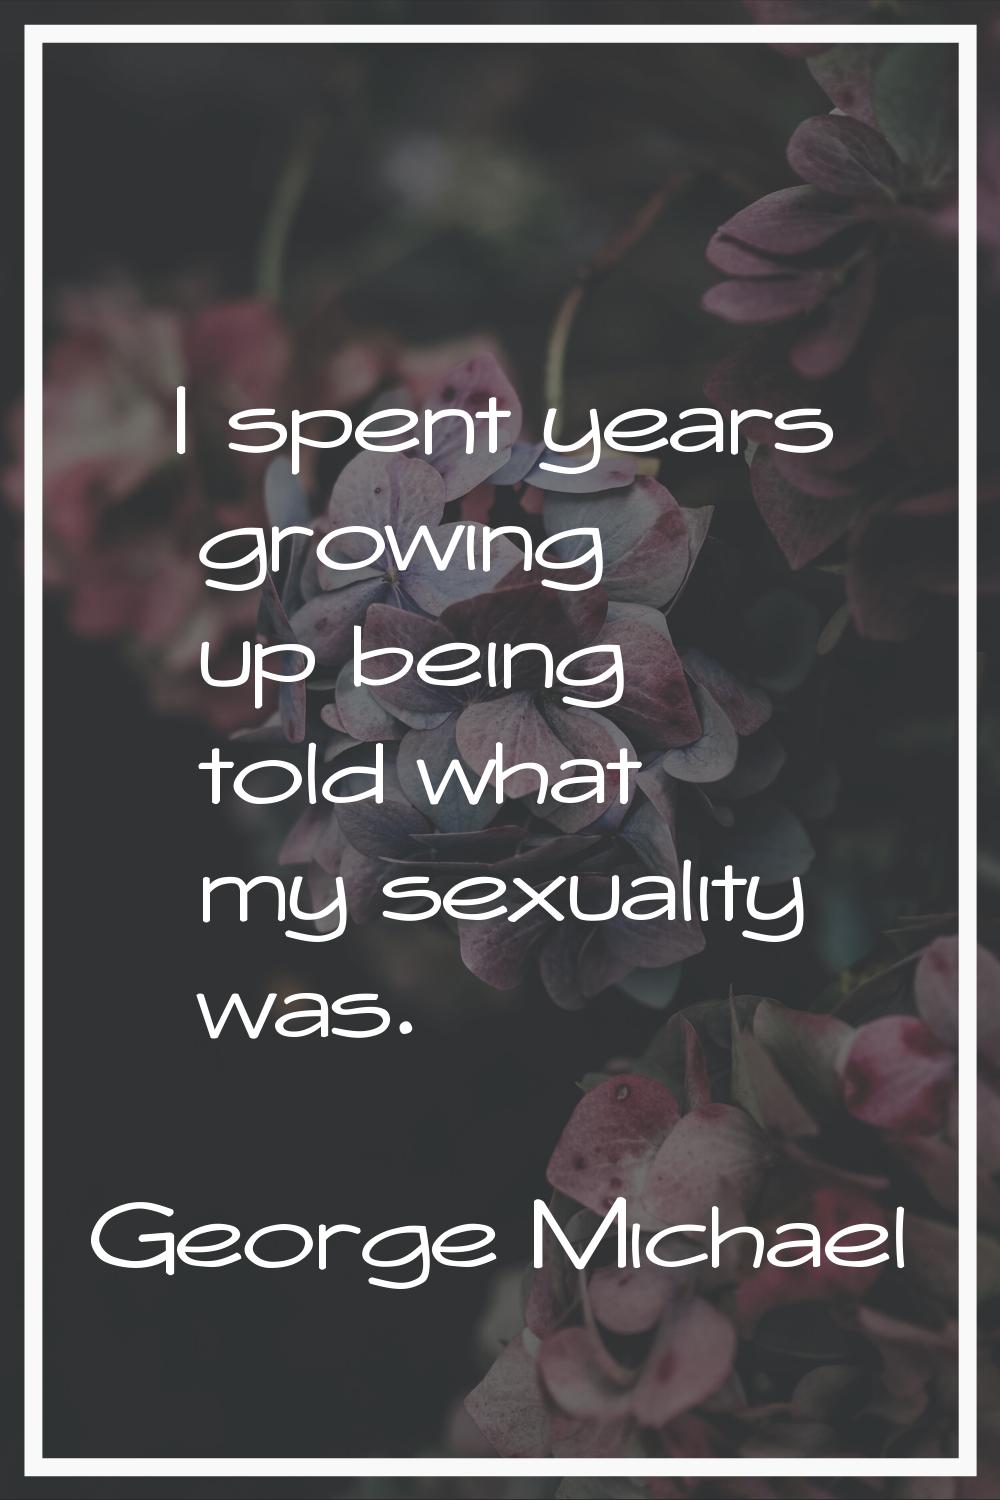 I spent years growing up being told what my sexuality was.